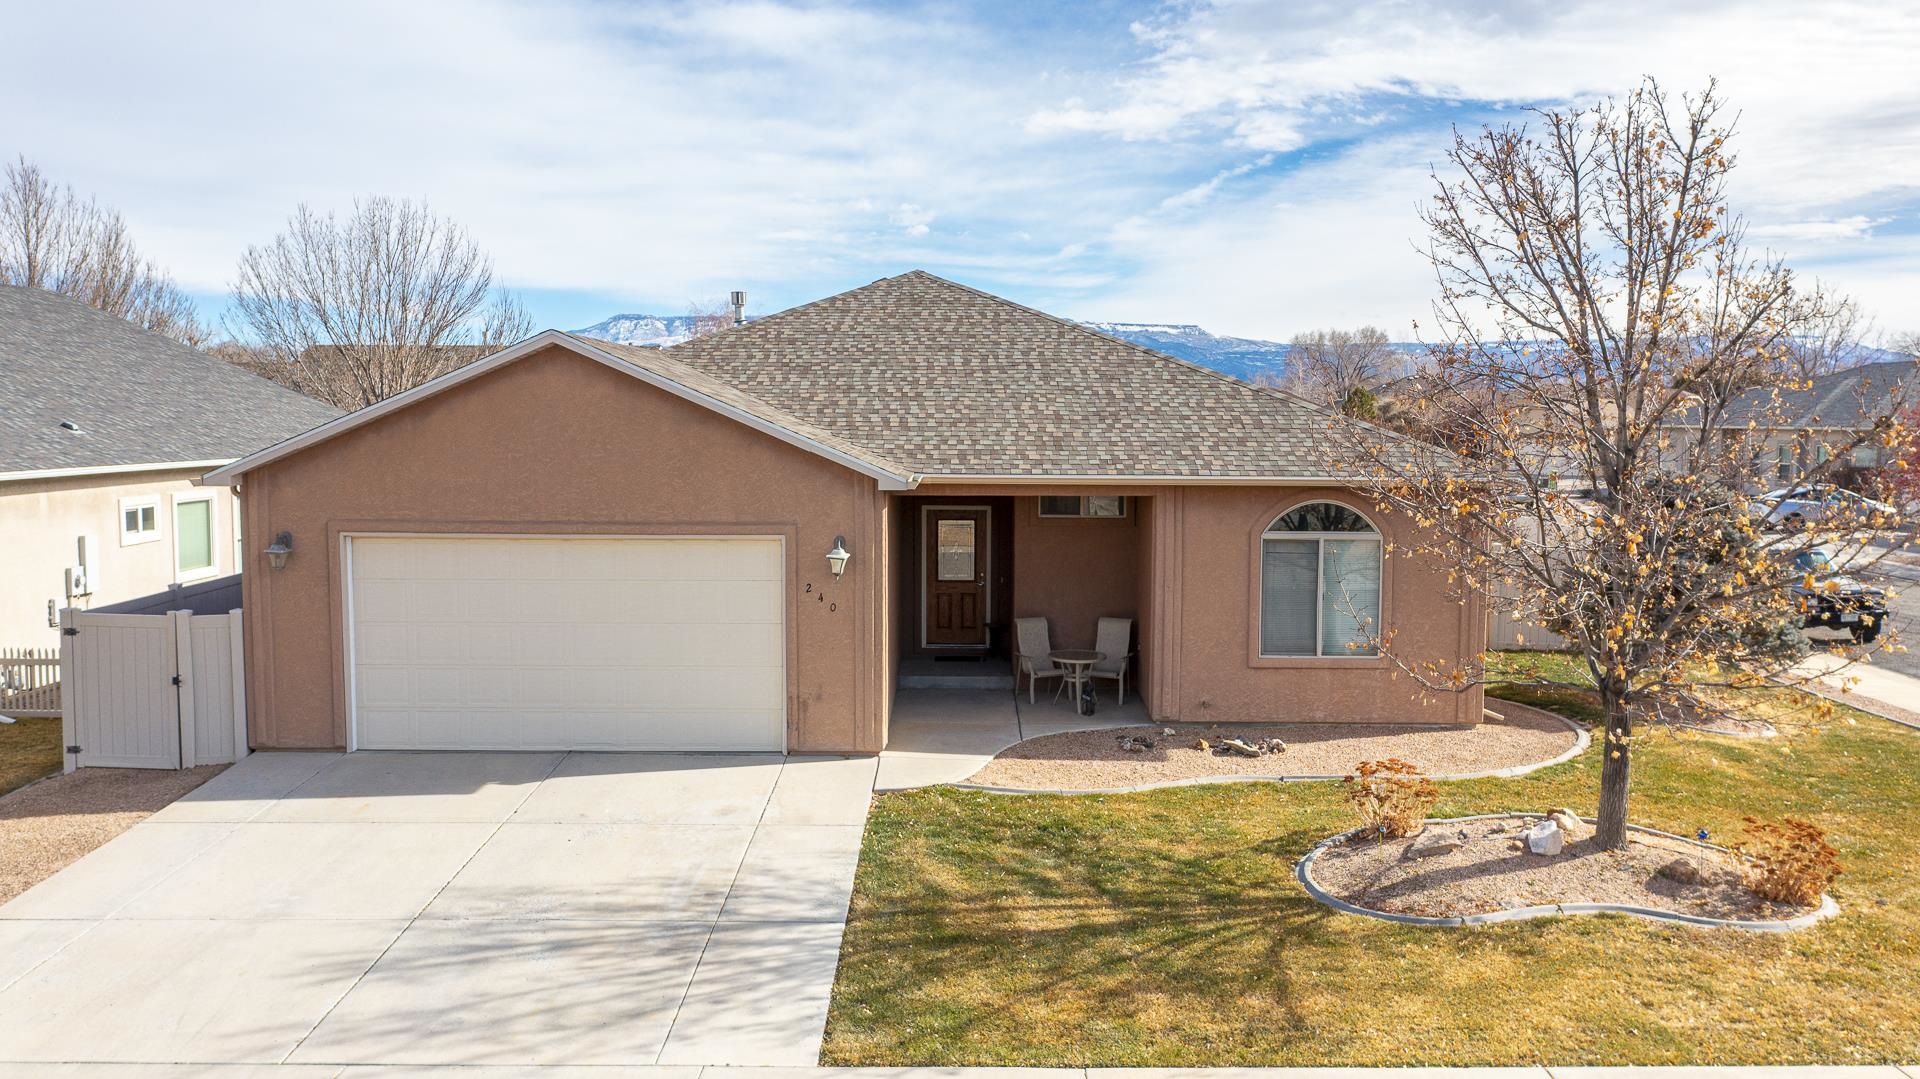 240 Tianna Way, Grand Junction, CO 81503